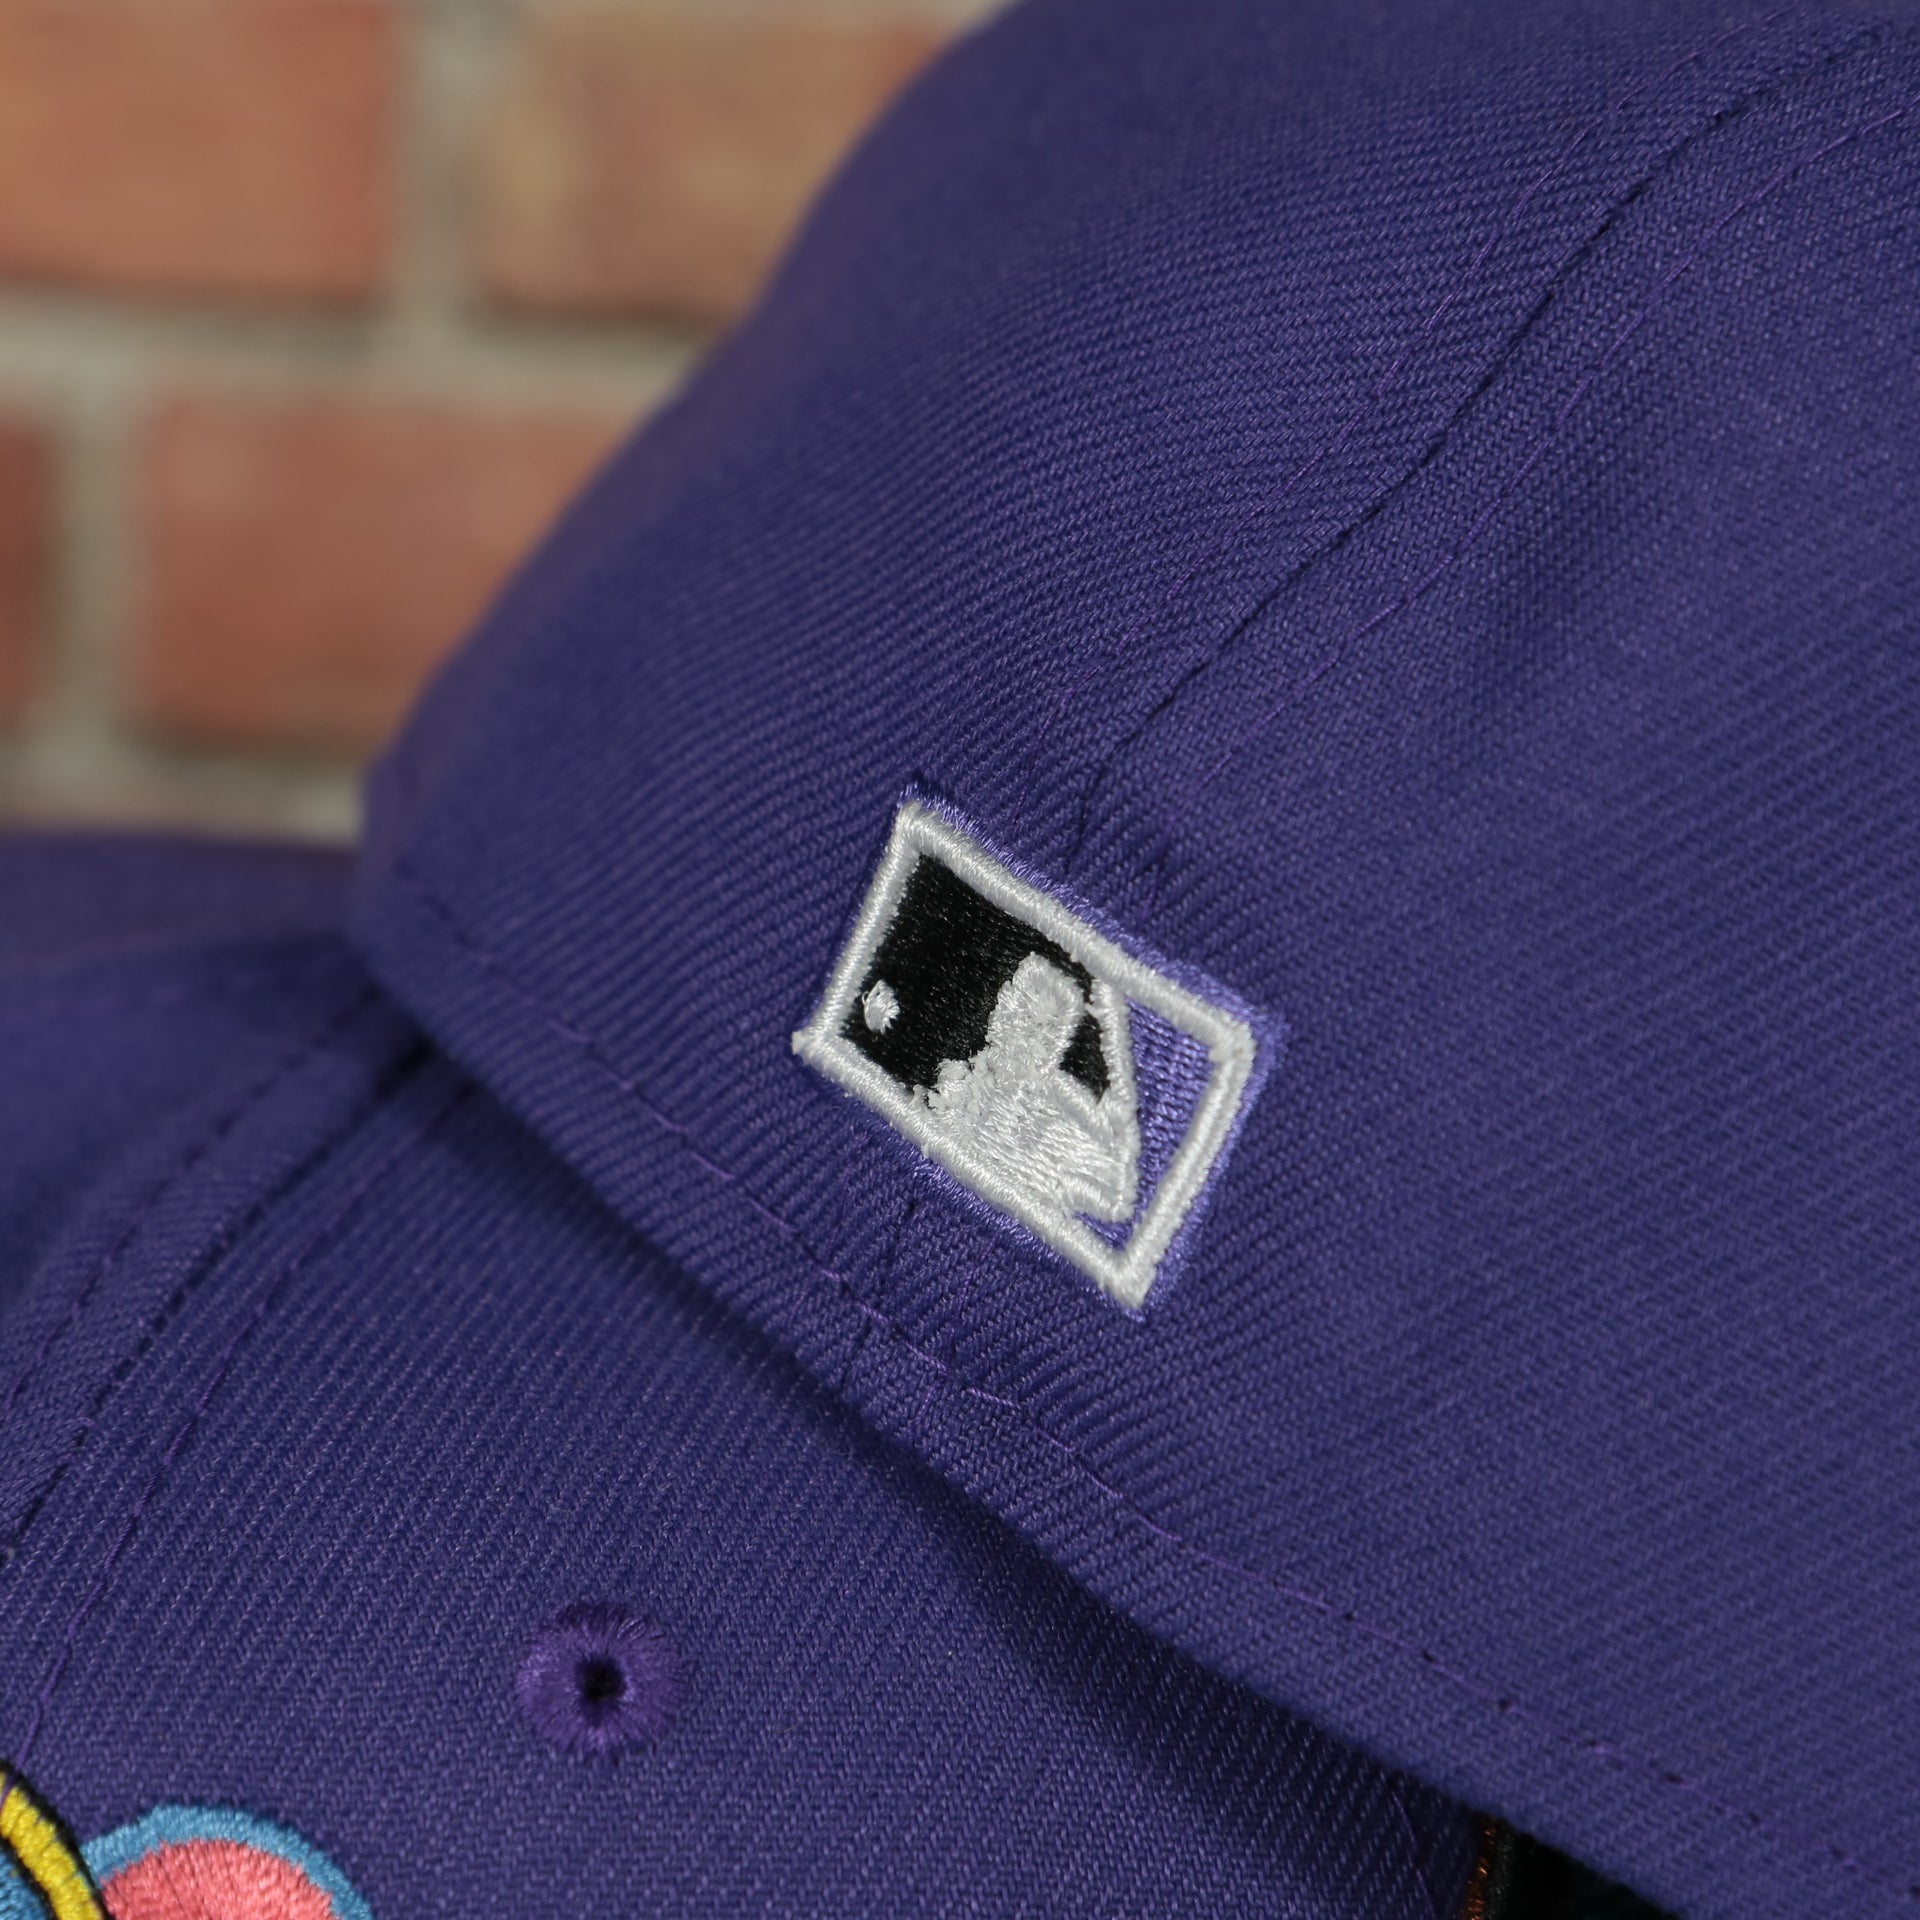 cooperstown batterman logo on the Arizona Diamondbacks Cooperstown Groovy World Series Champions Patch 59Fifty Fitted Cap | New Era Groovy Side Patch 5950